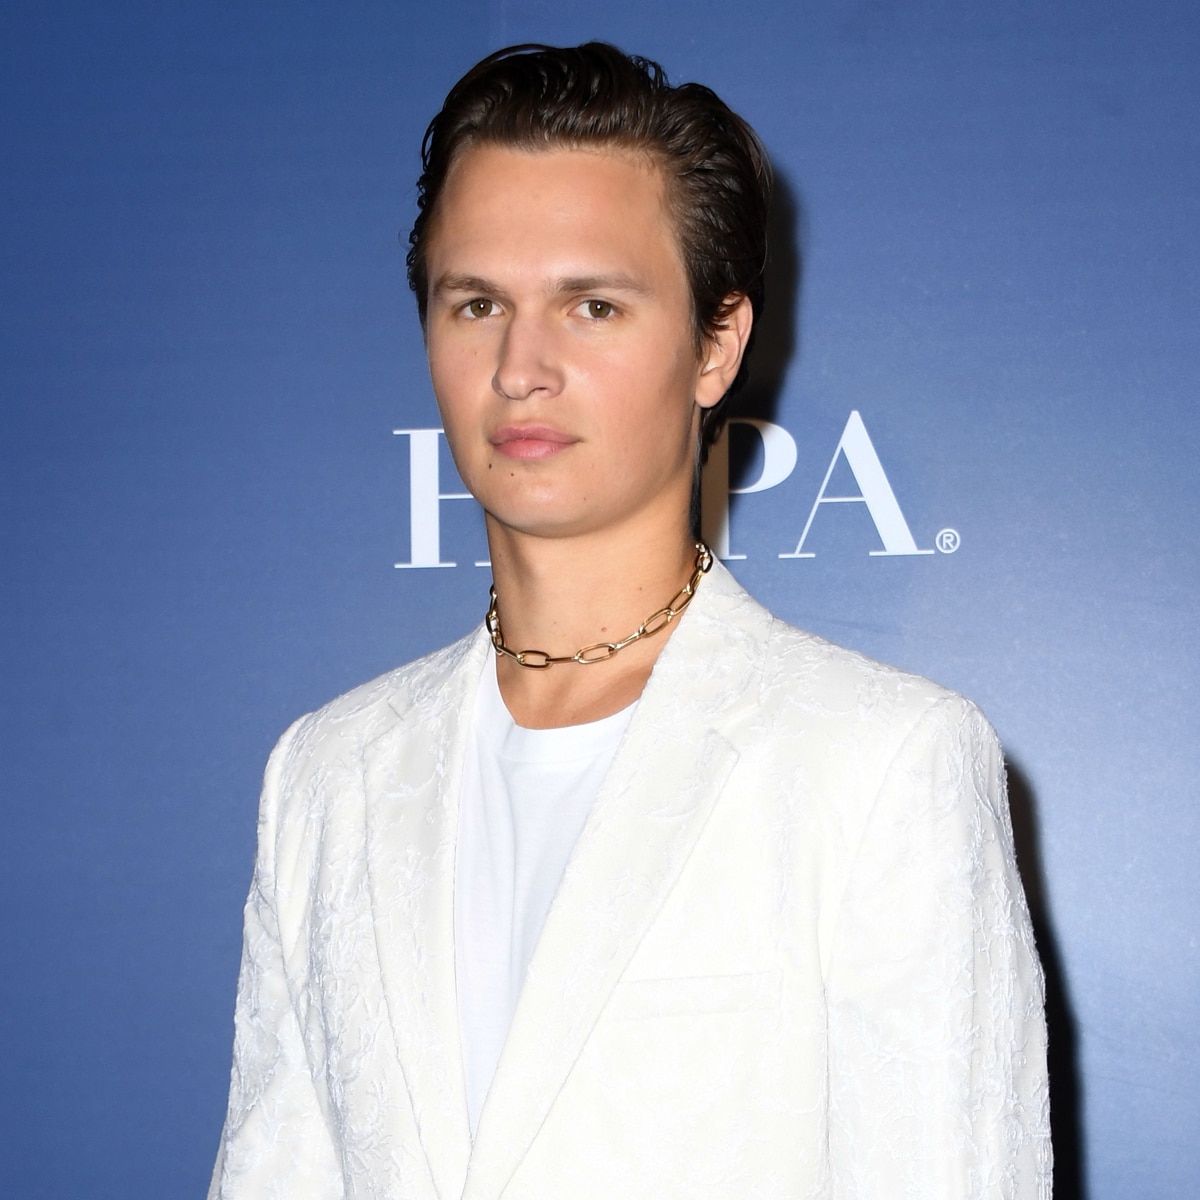 Ansel Elgort Resurfaces on Social Media With Shaved Head - E! Online